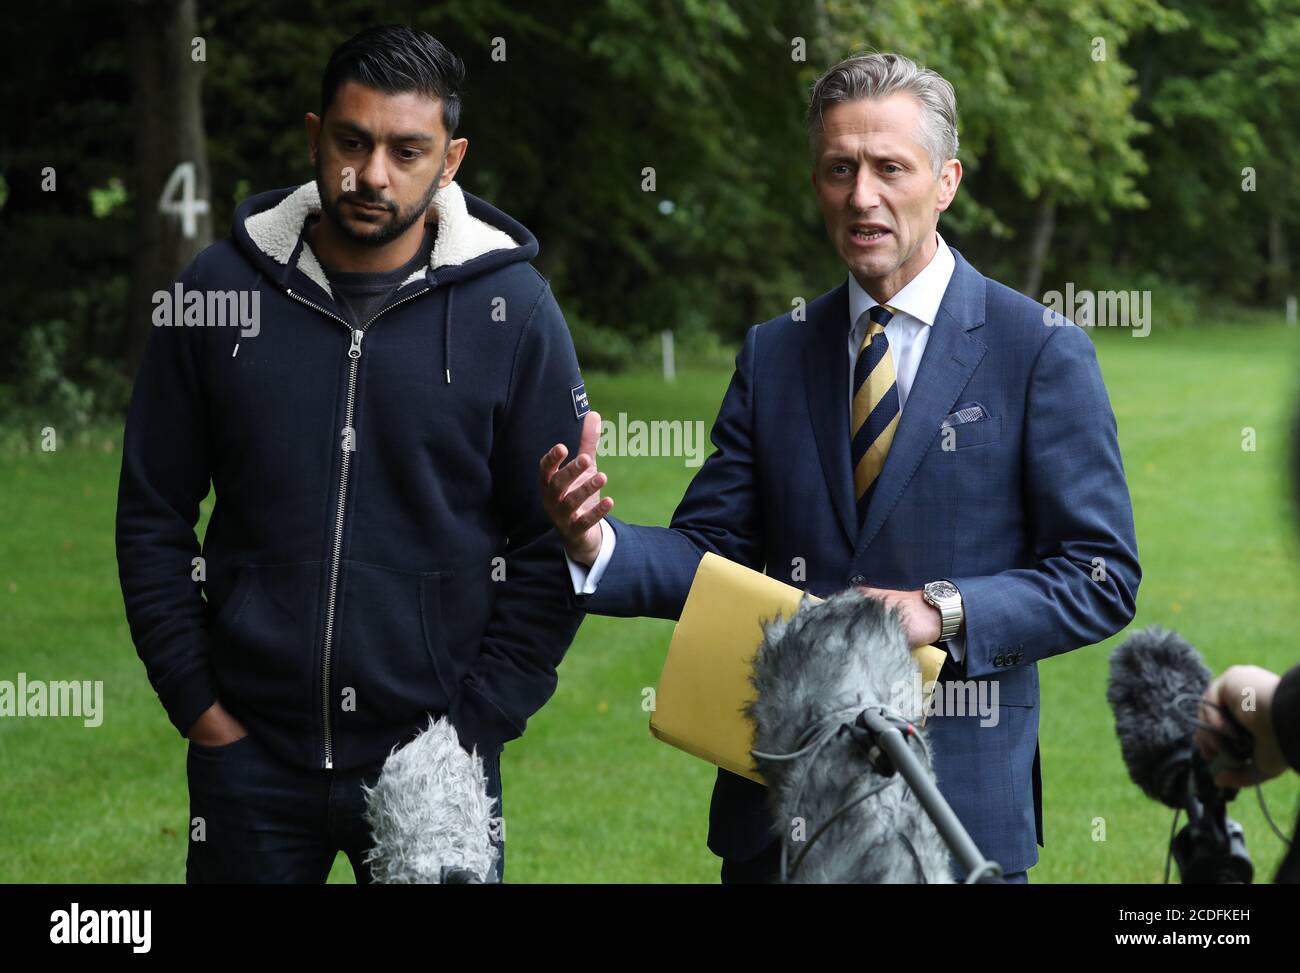 Sadat Ahmed brother of Samia Ahmed alongside Detective Superintendent Martin MacLean(r) as they speak to the media at Gogarburn Golf Course, Newbridge, Edinburgh, as five years ago this weekend Saima Ahmed, 36, was reported missing from London and whose body was found in the grounds of the golf course on 9 January 2016. Stock Photo